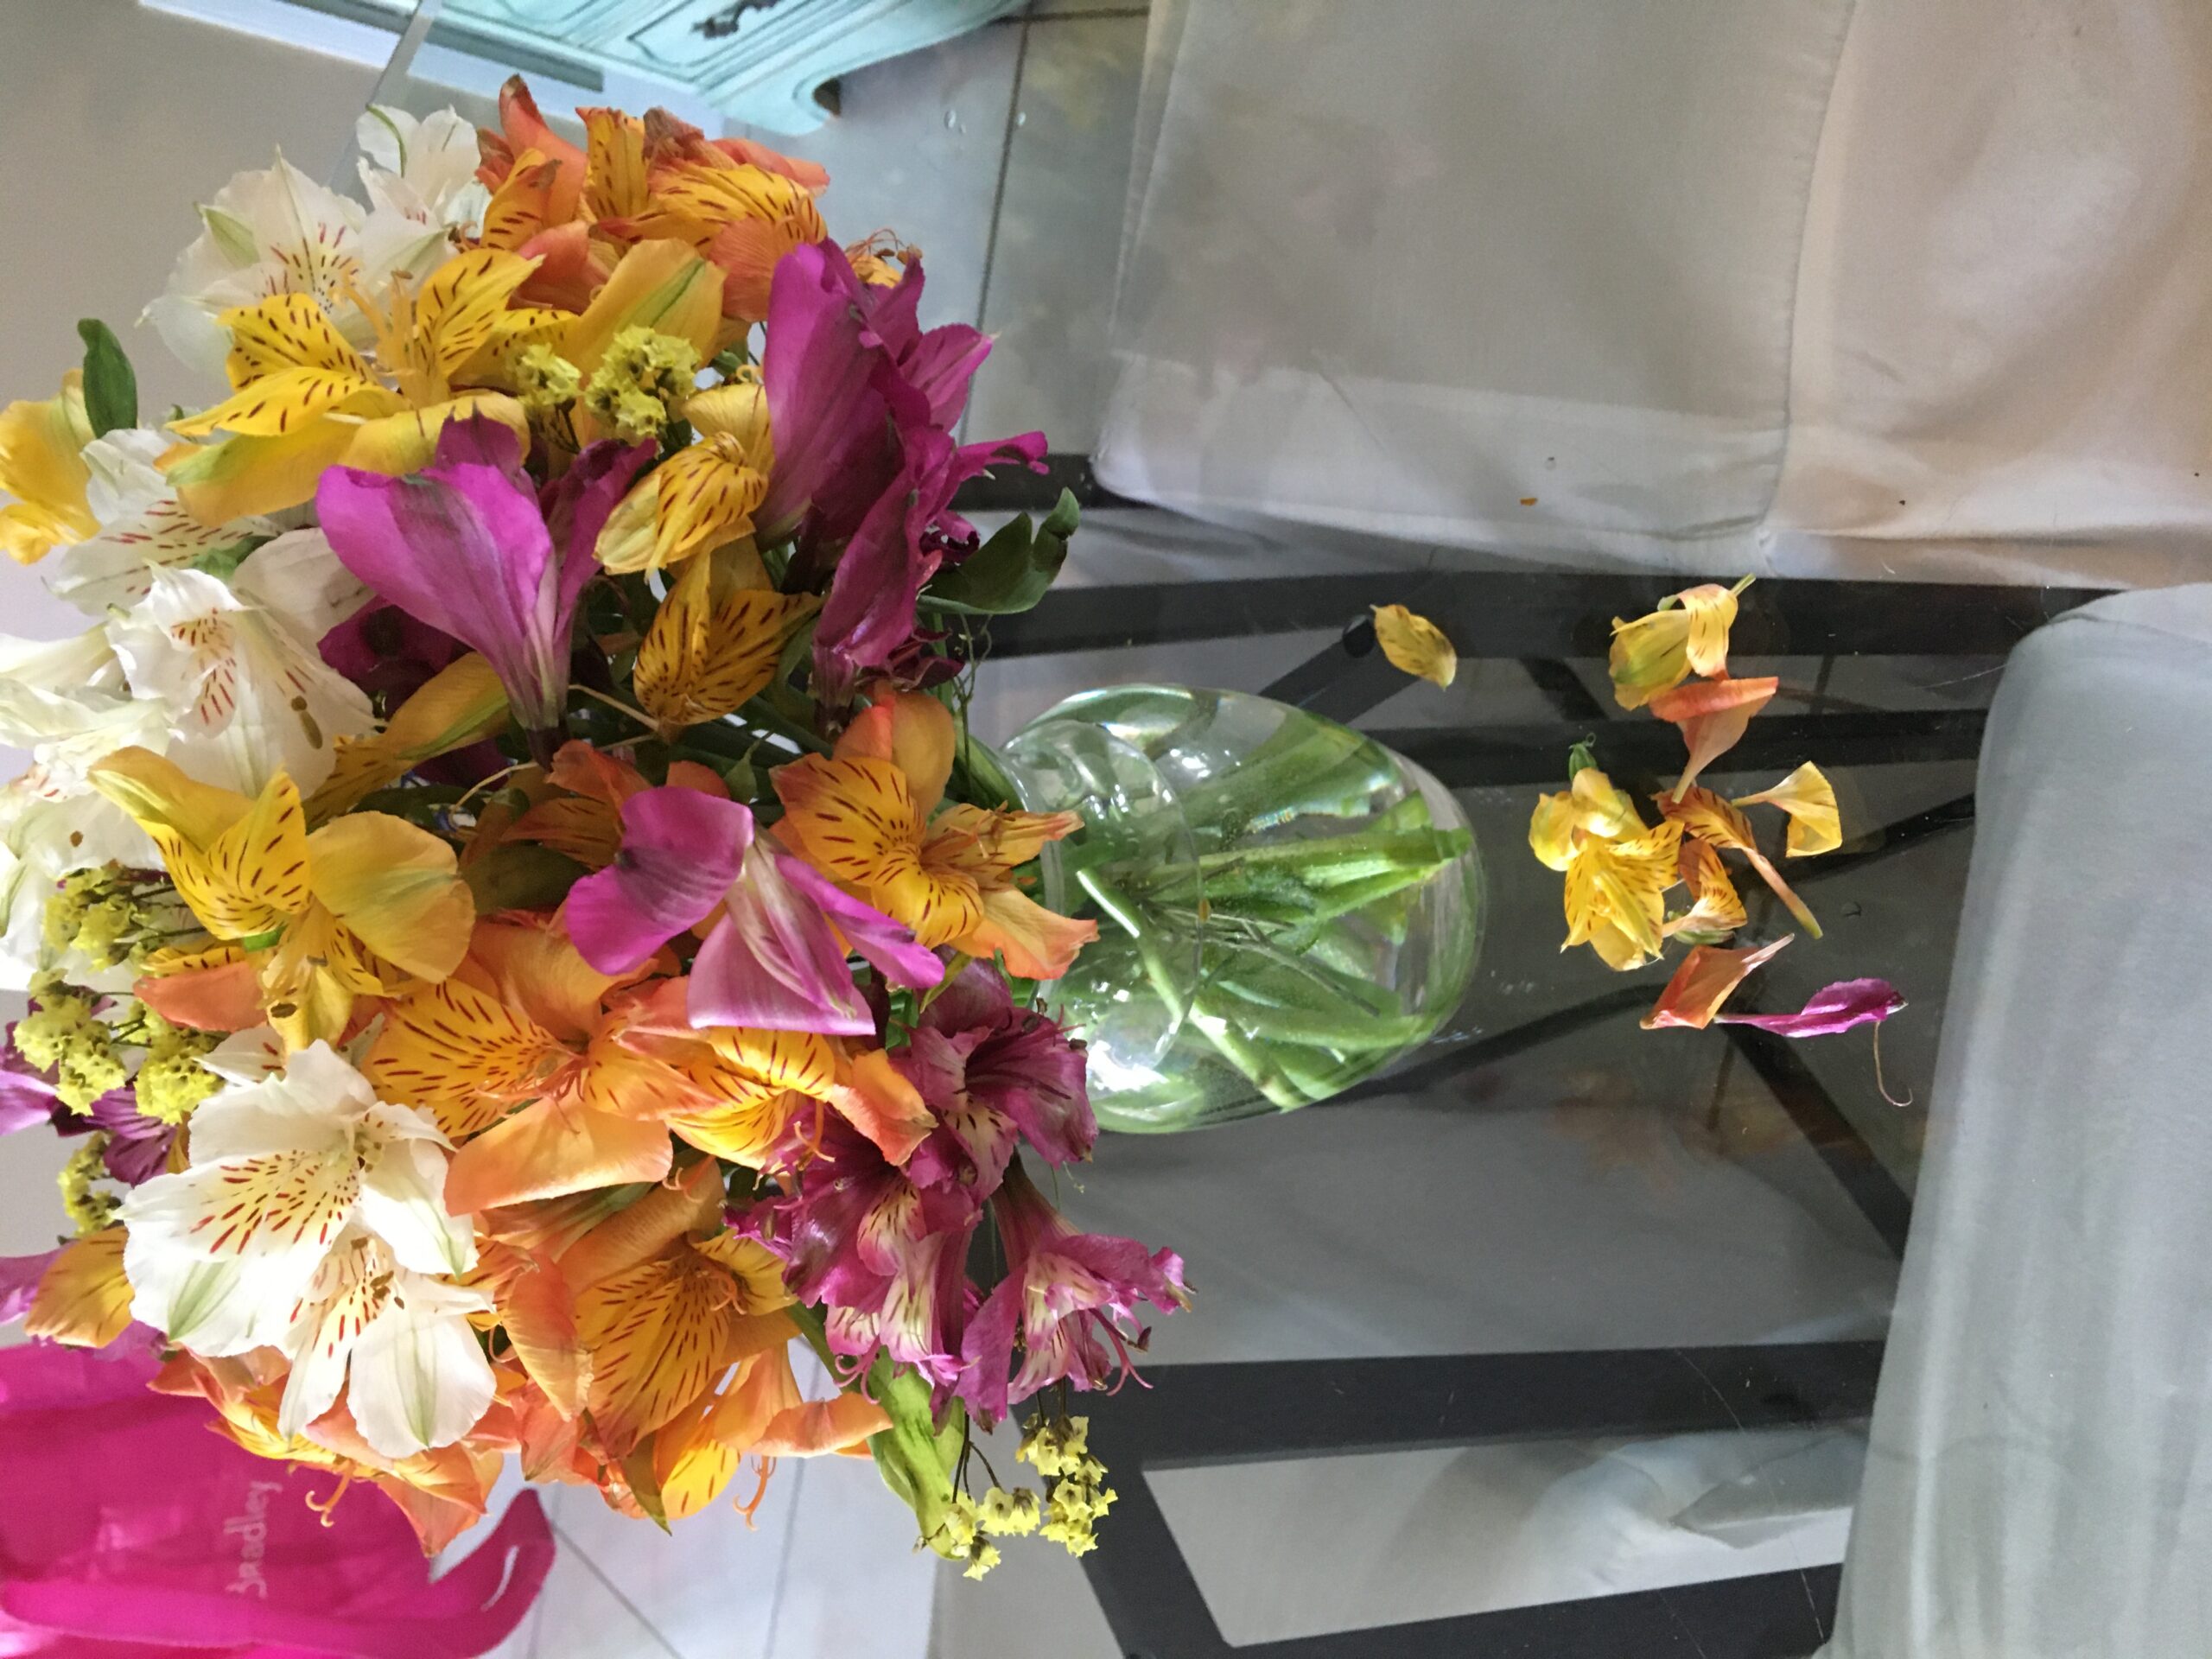 I received flowers that were half dead